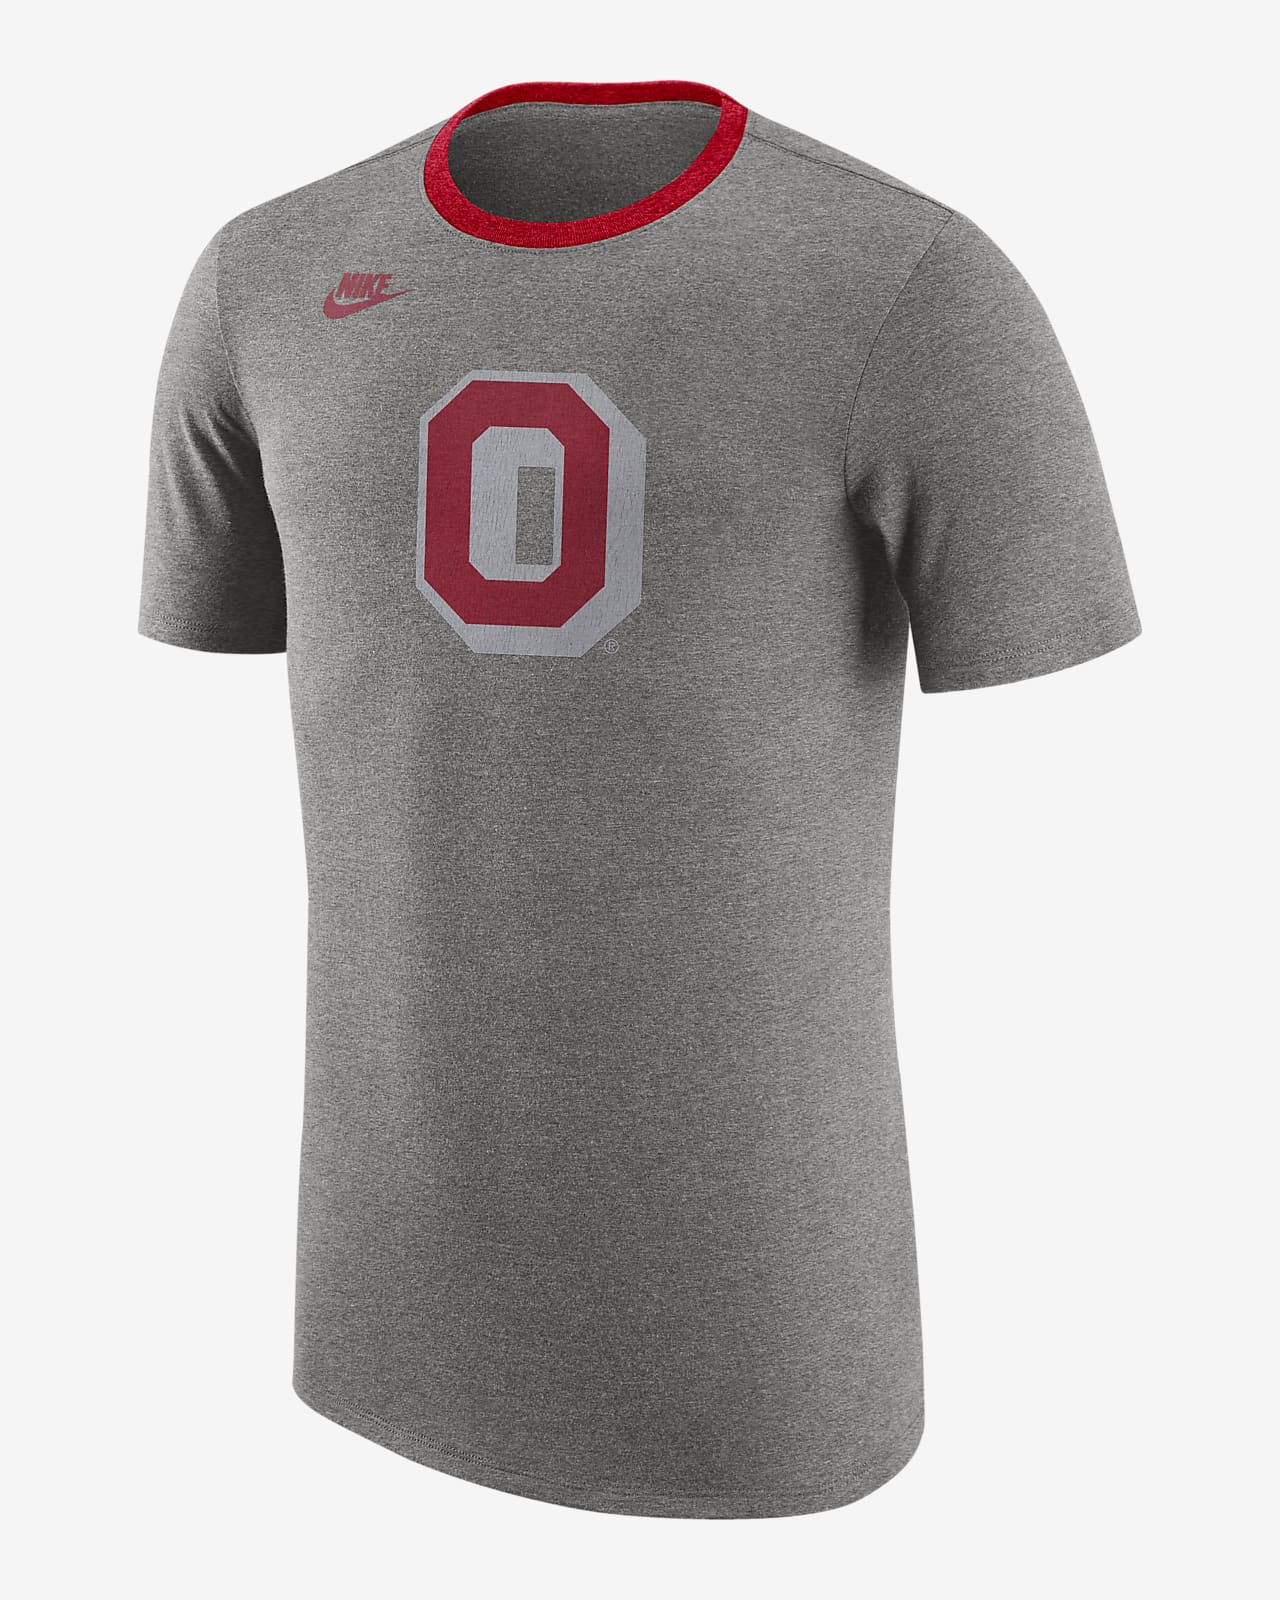 red and gray nike shirt